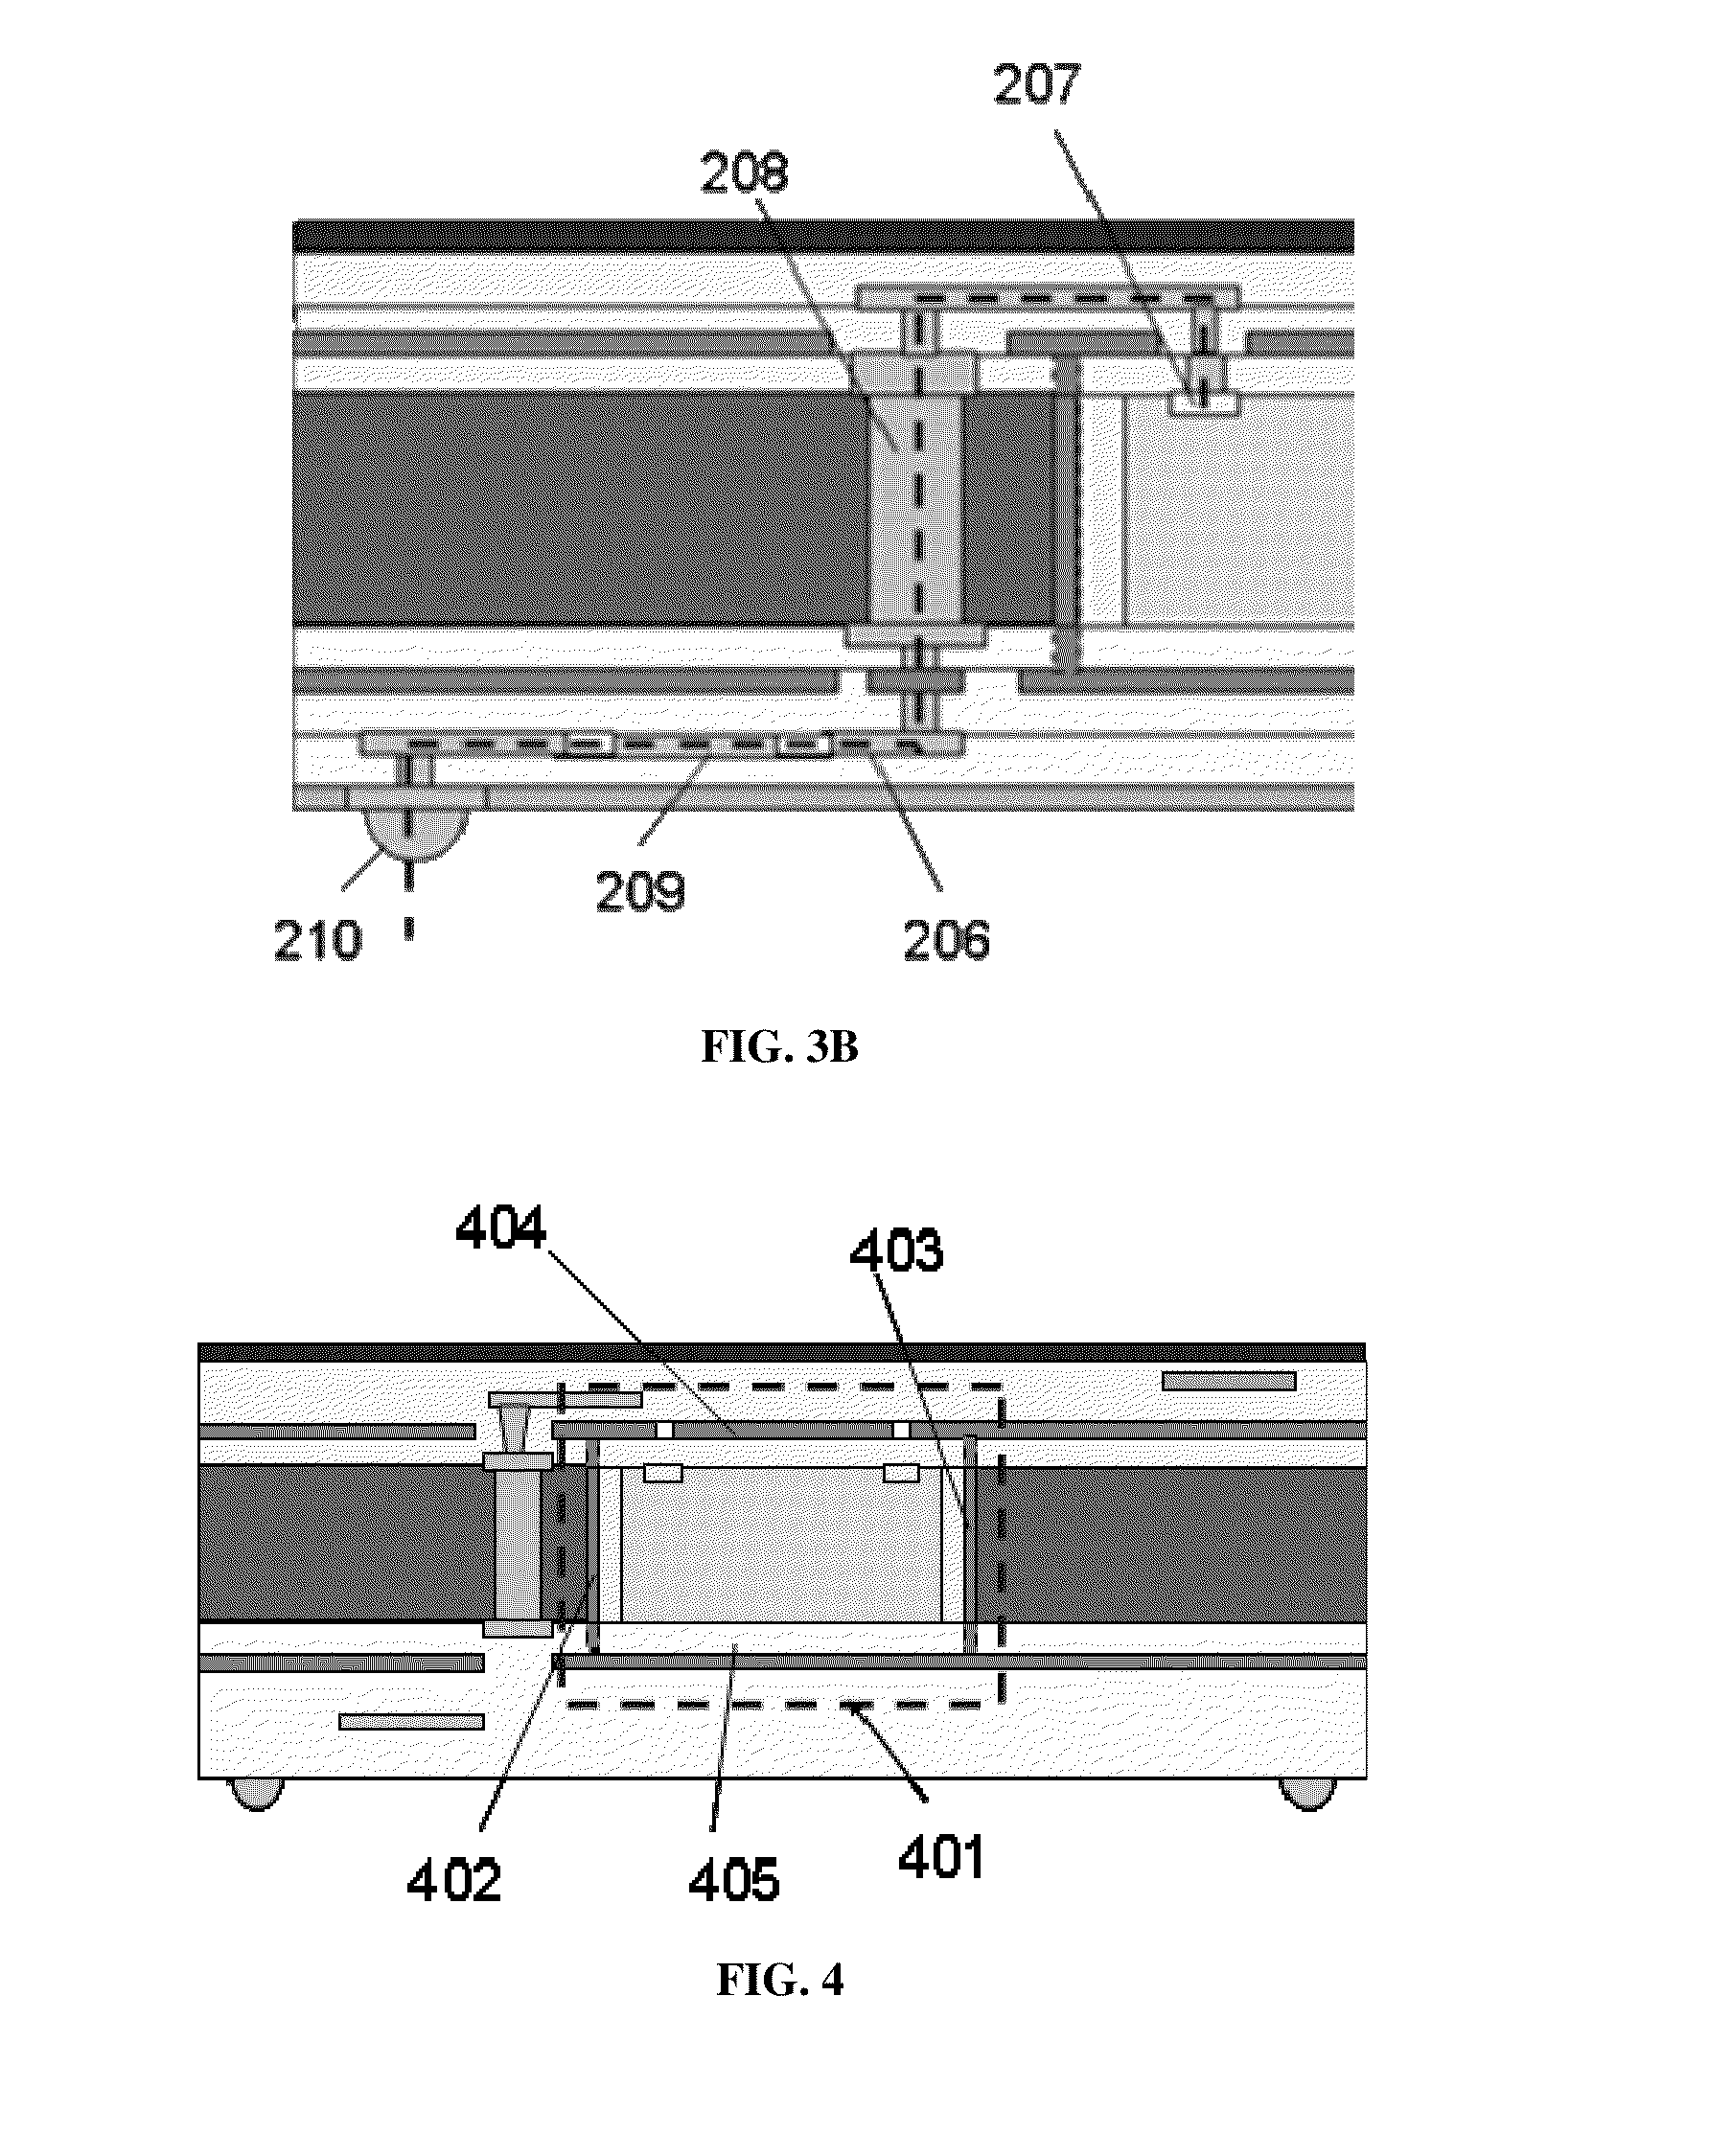 Partitioned Hybrid Substrate for Radio Frequency Applications